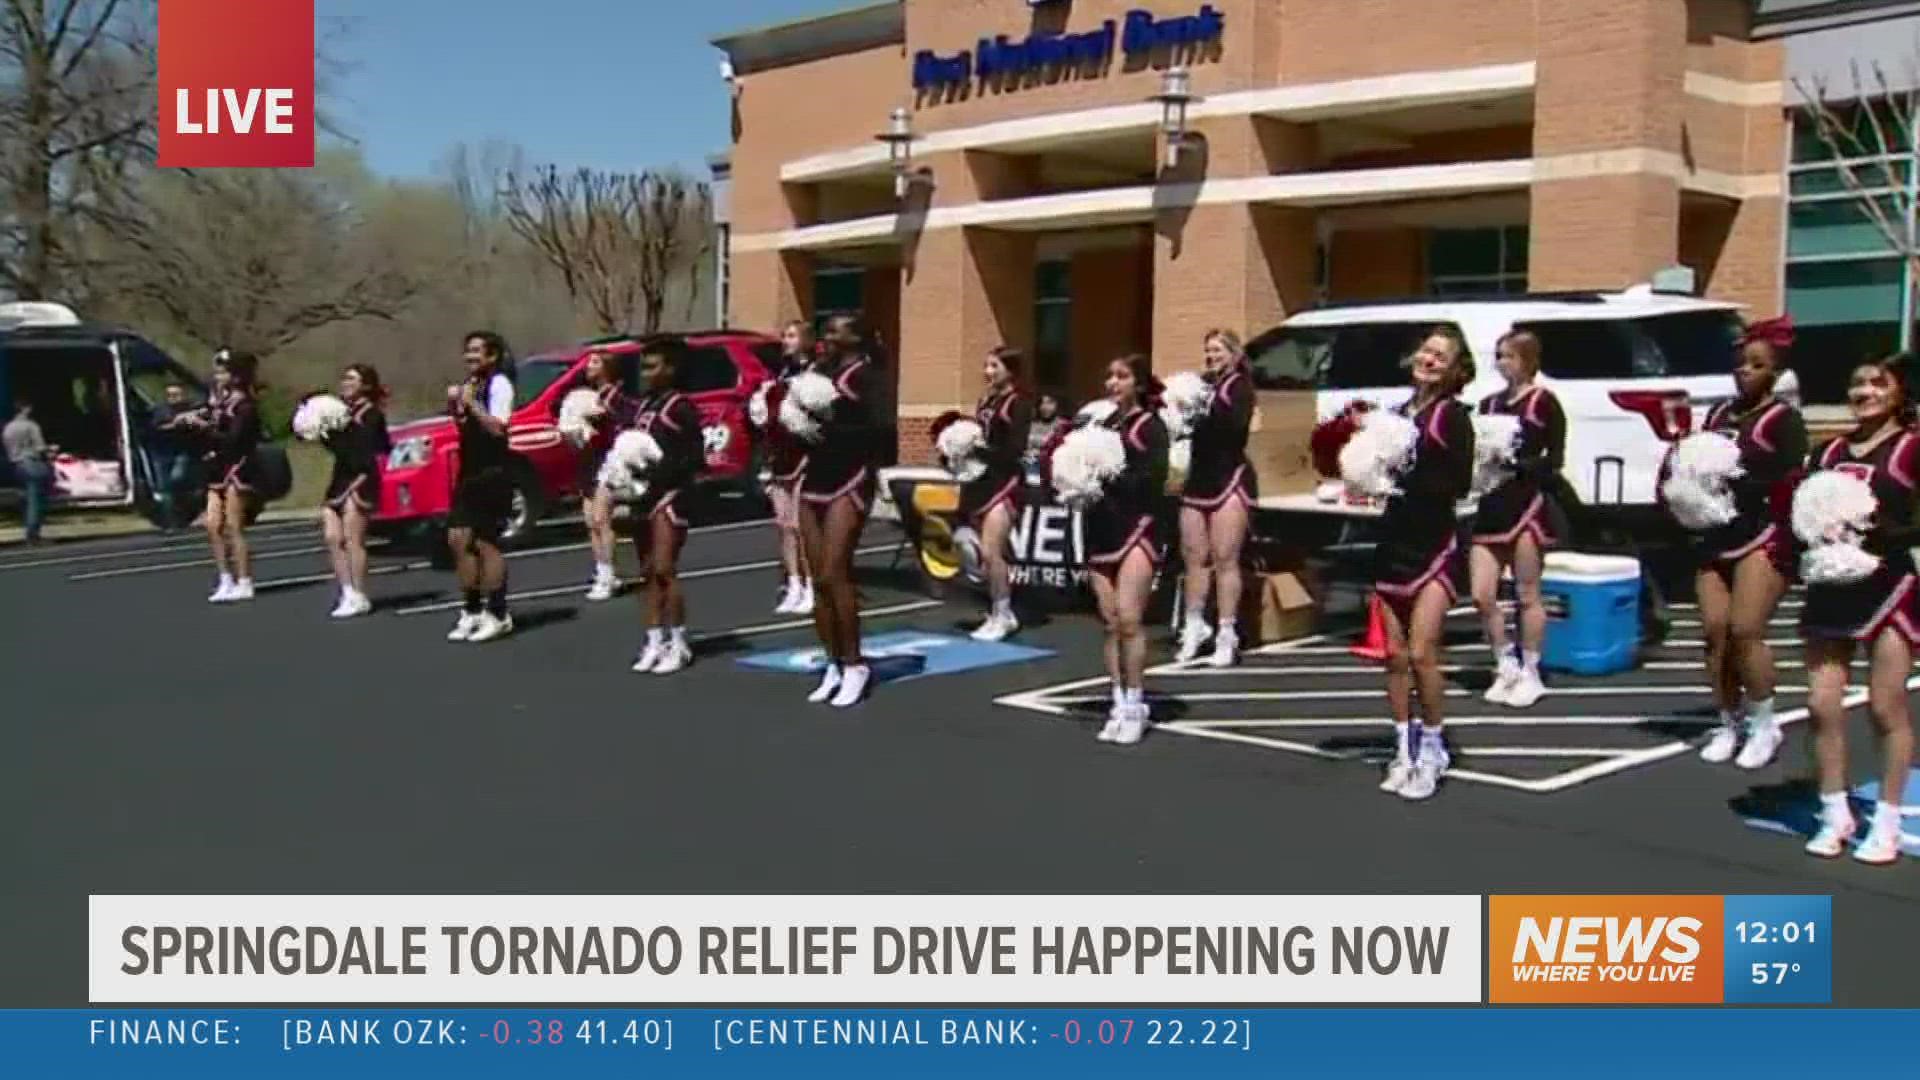 5NEWS, First National Bank and iHeartRadio have partnered with the Red Cross to host a Tornado Relief Drive.